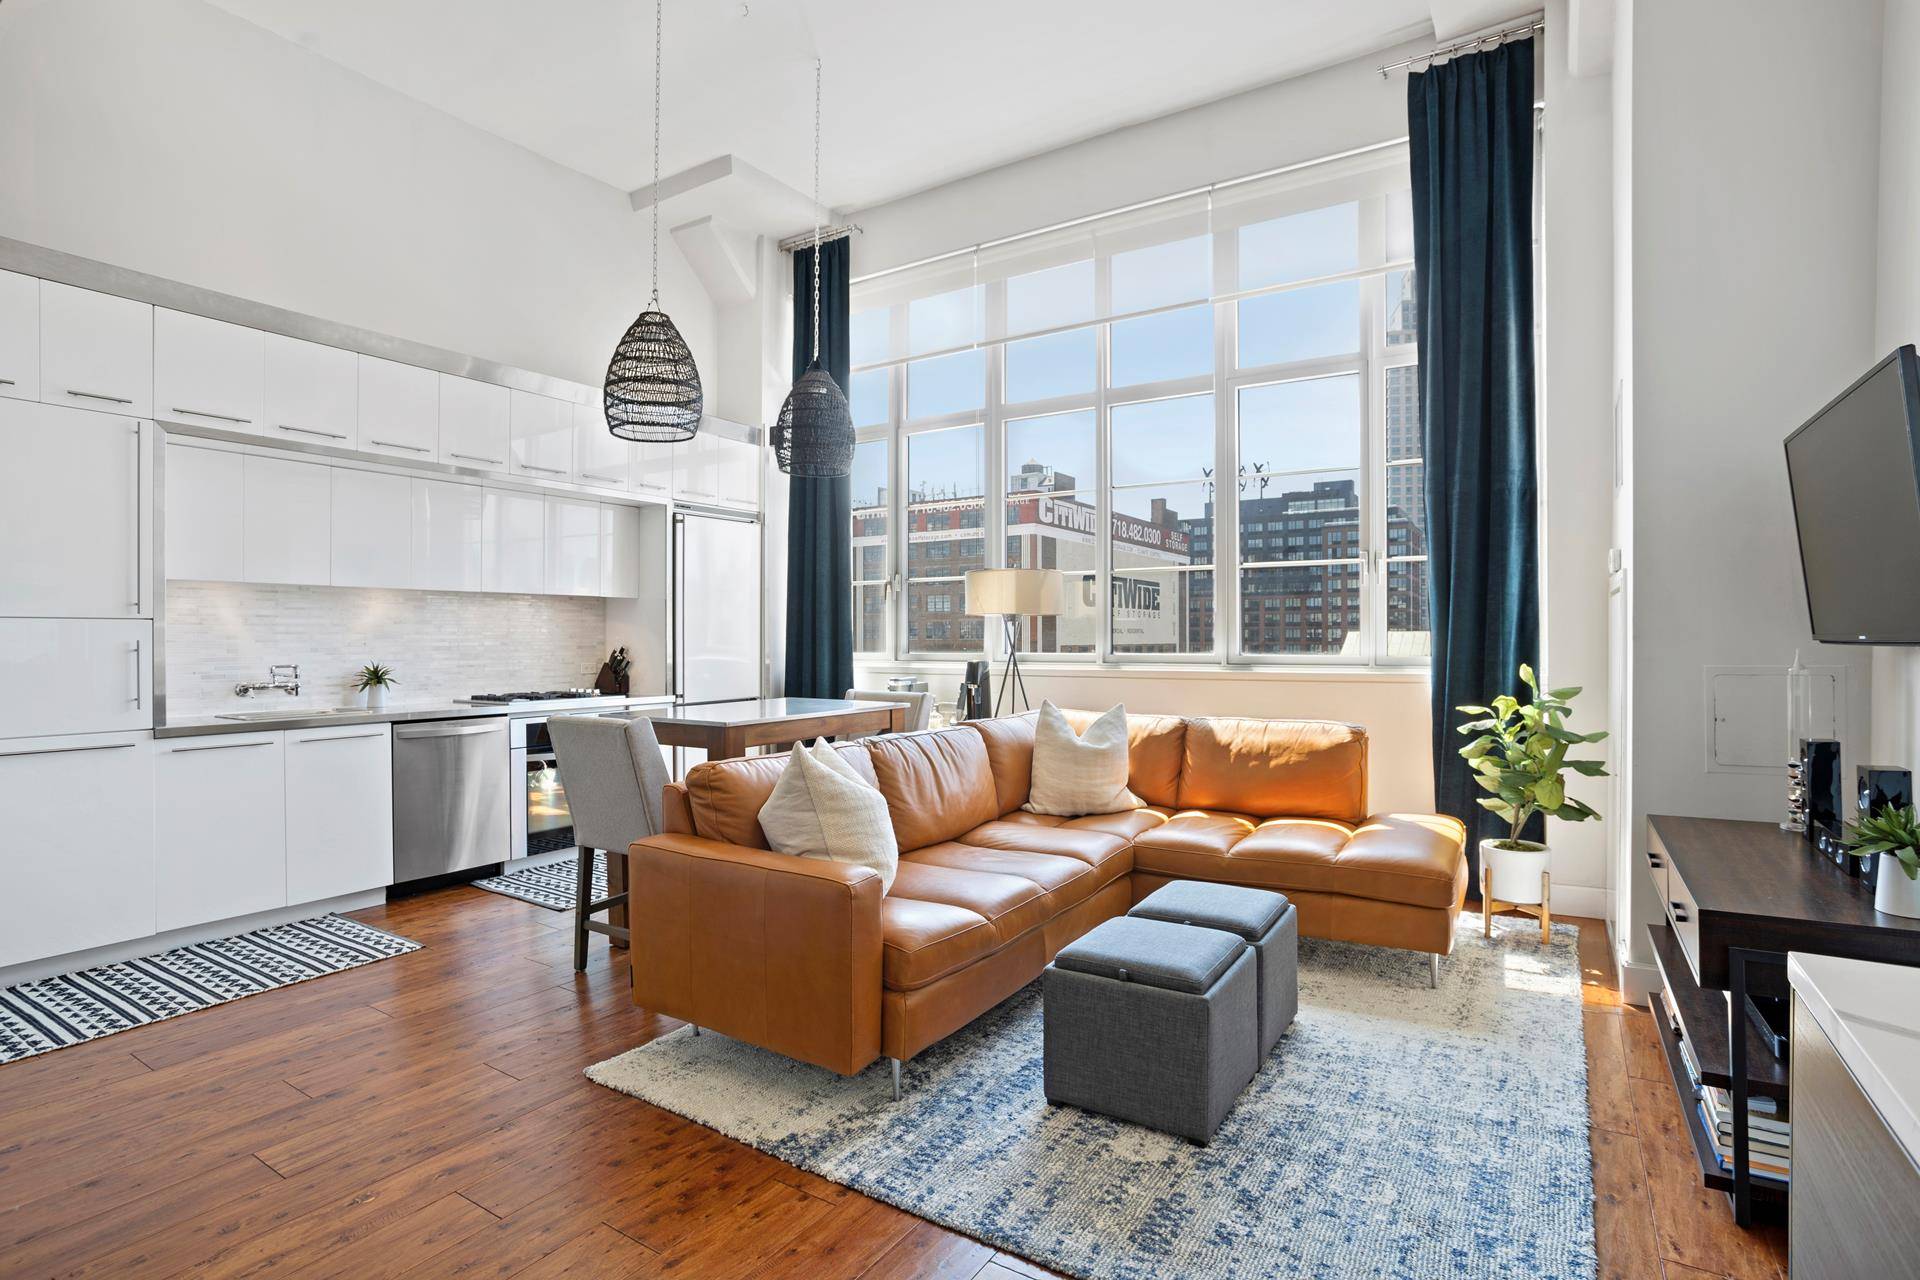 STUNNING LARGE ONE BEDROOM LOFT WITH HOME OFFICE SECOND INTERIOR BEDROOM AT THE DESIRABLE ARRIS LOFTS IN PRIME LONG ISLAND CITY.